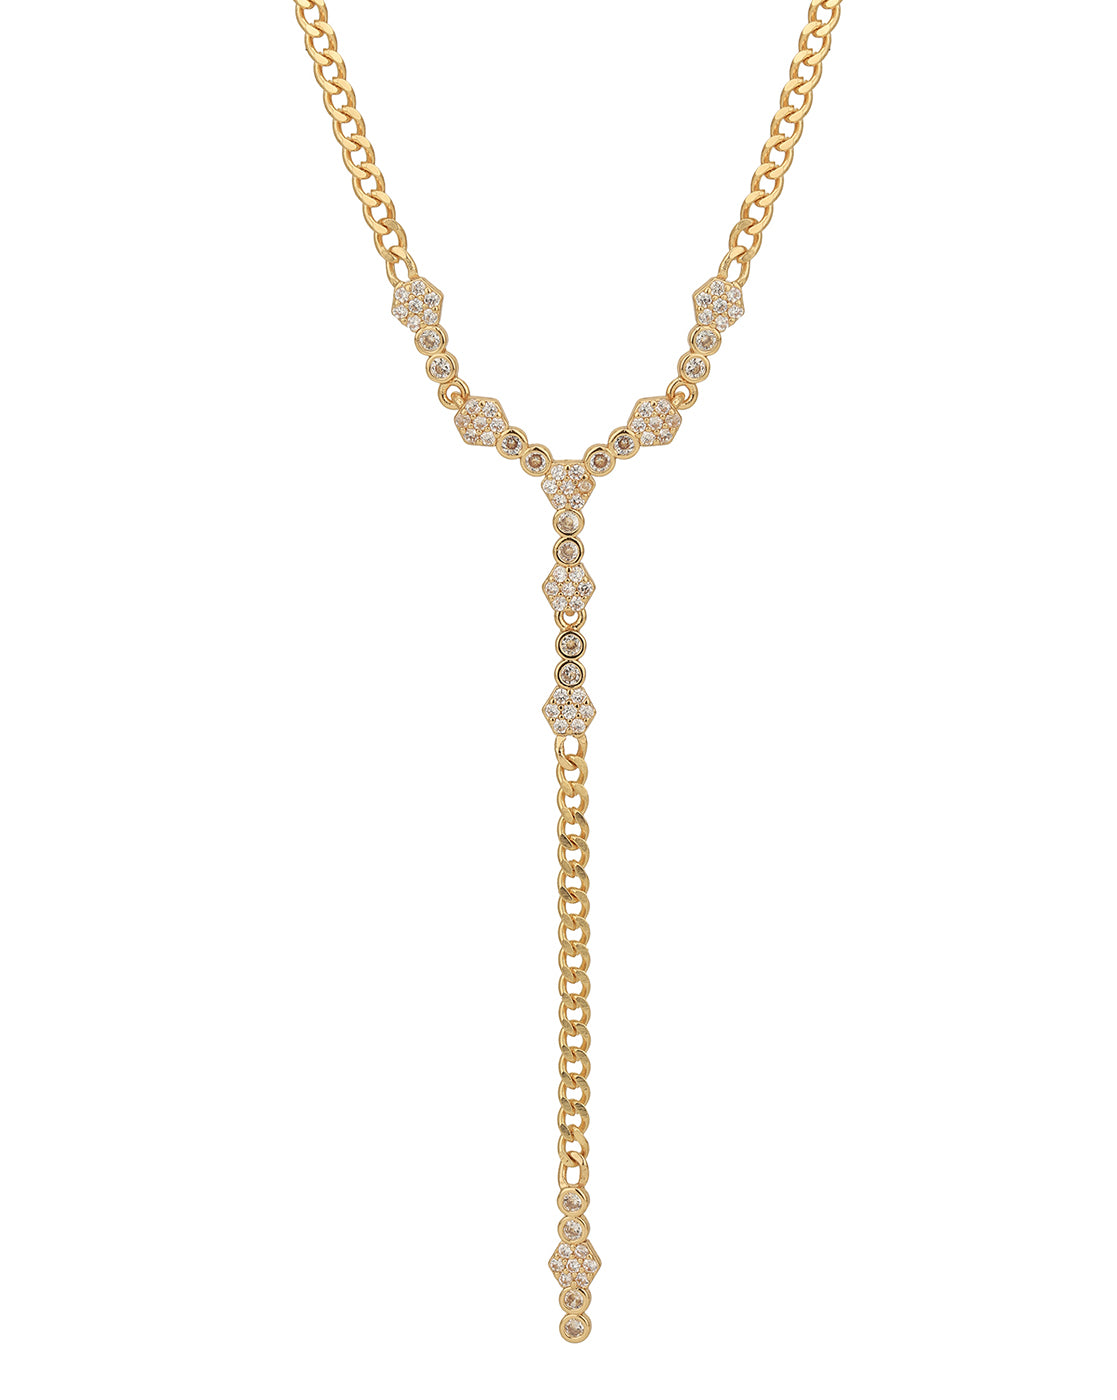 Premium Gold Plated CZ Lariat Necklace for women